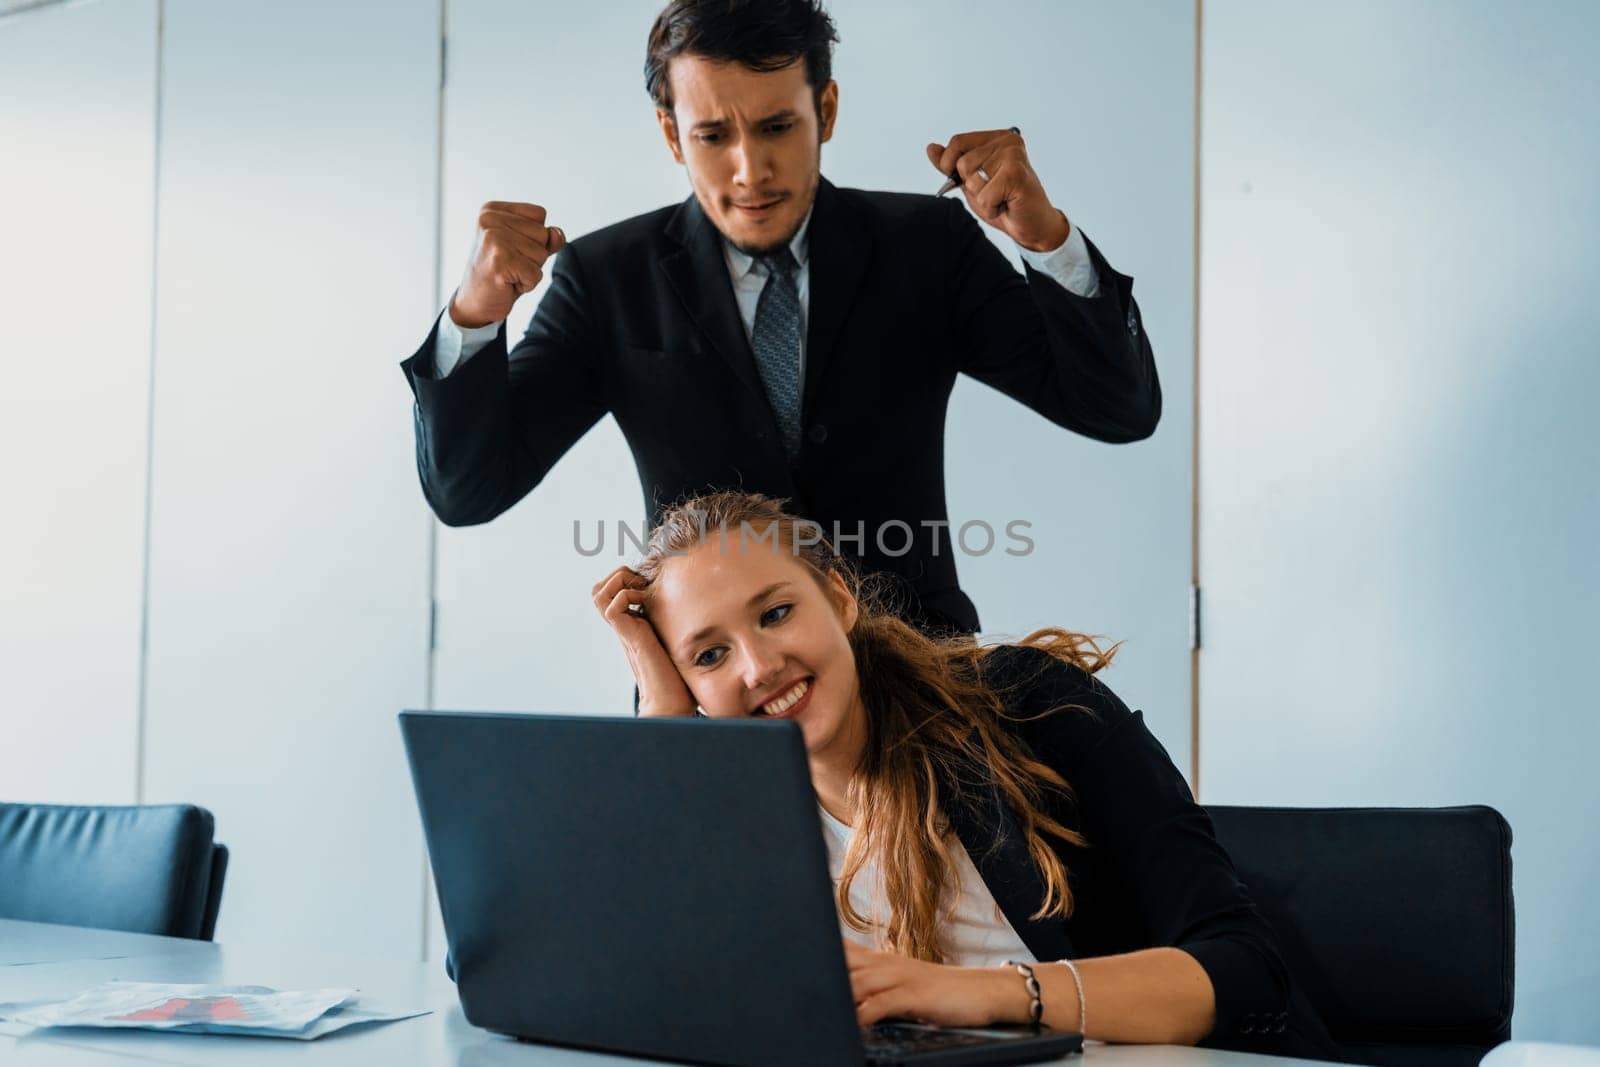 Businessman boss feels angry and mad at bad misbehaving businesswoman employee who ignores the work tasks at the workplace. Firing workers and human resources management problem concept. uds